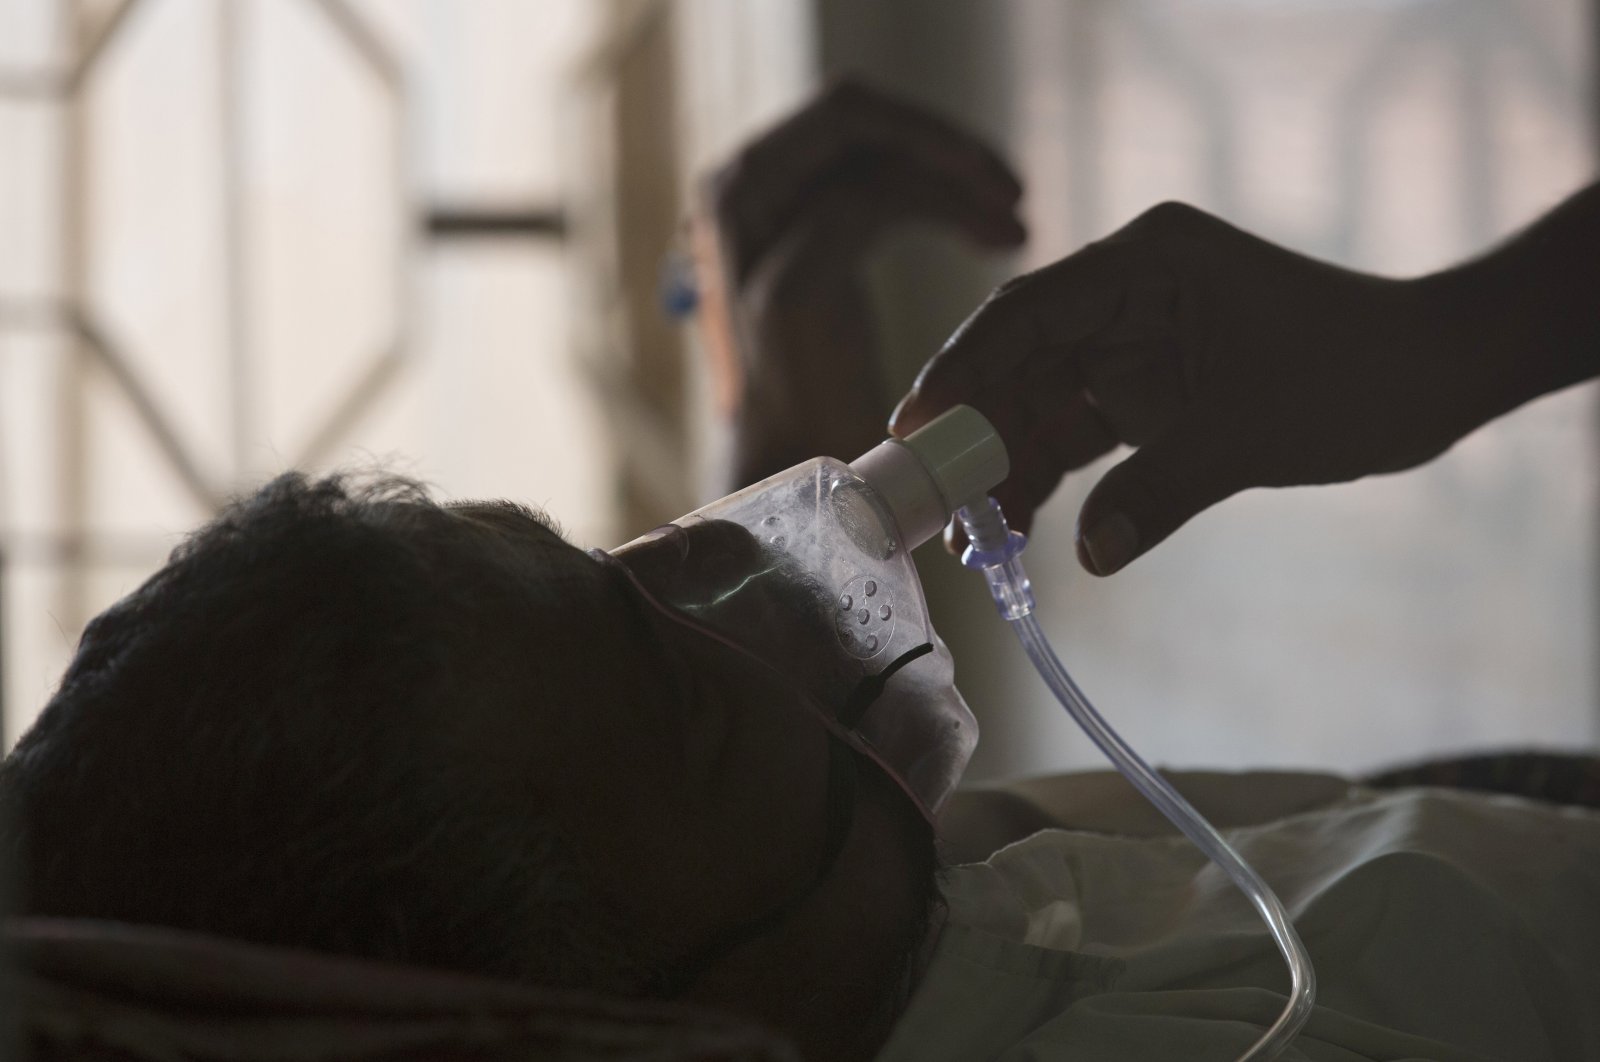 A relative adjusts the oxygen mask of a tuberculosis patient at a hospital in Hyderabad, India, March 24, 2018. (AP Photo)